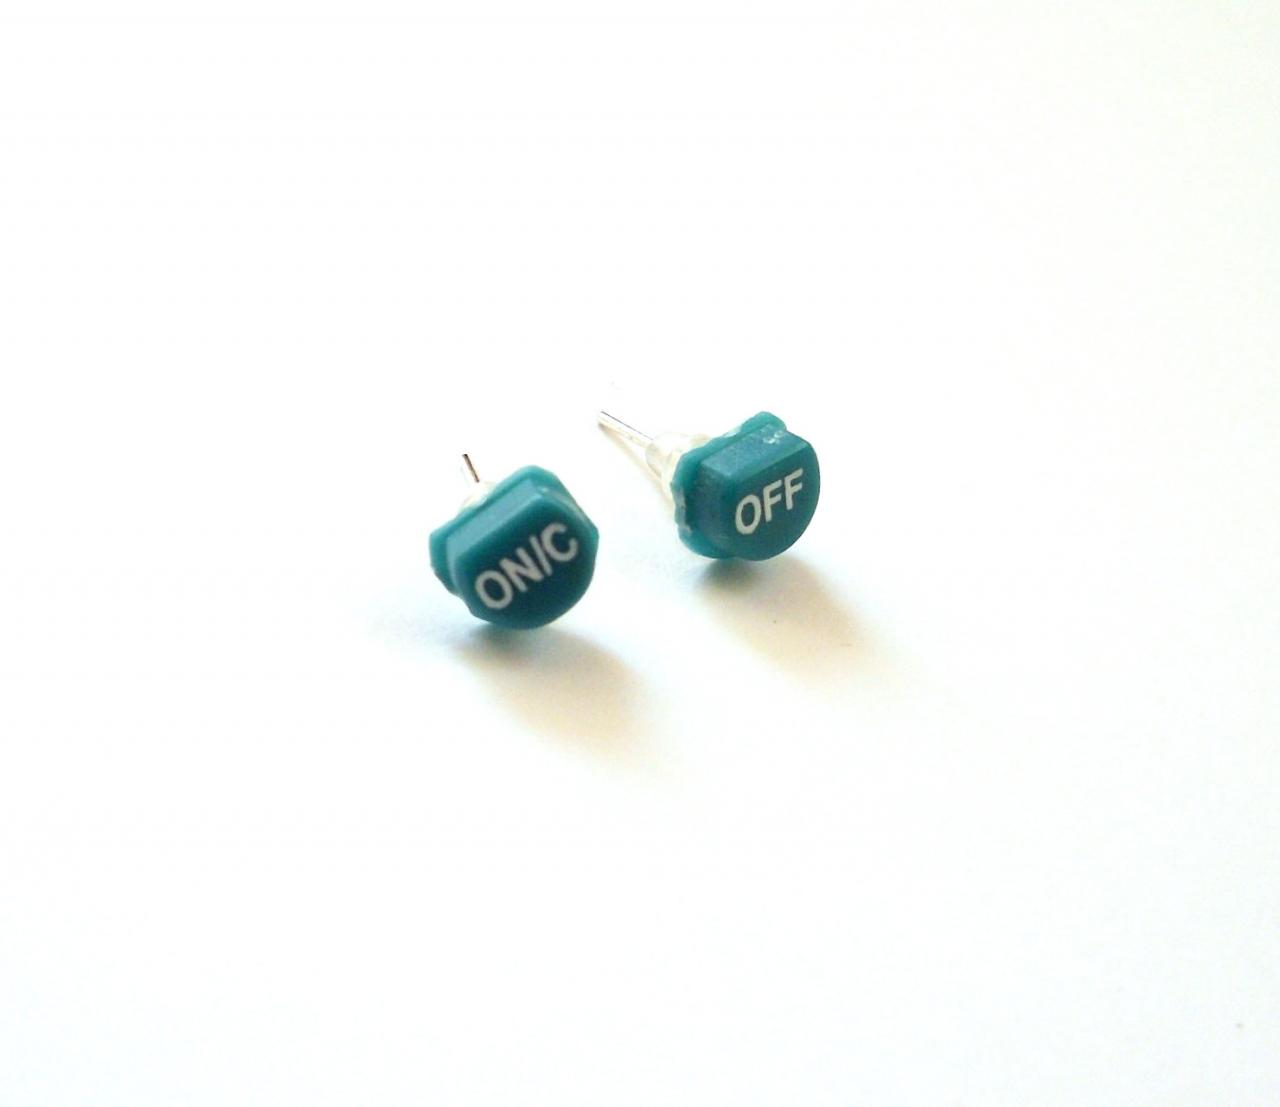 Green Studs Made Of Repurposed Calculator Buttons On Off Geek Earrings Minimalist Tech Nerd Jewelry Upcycled Recycled